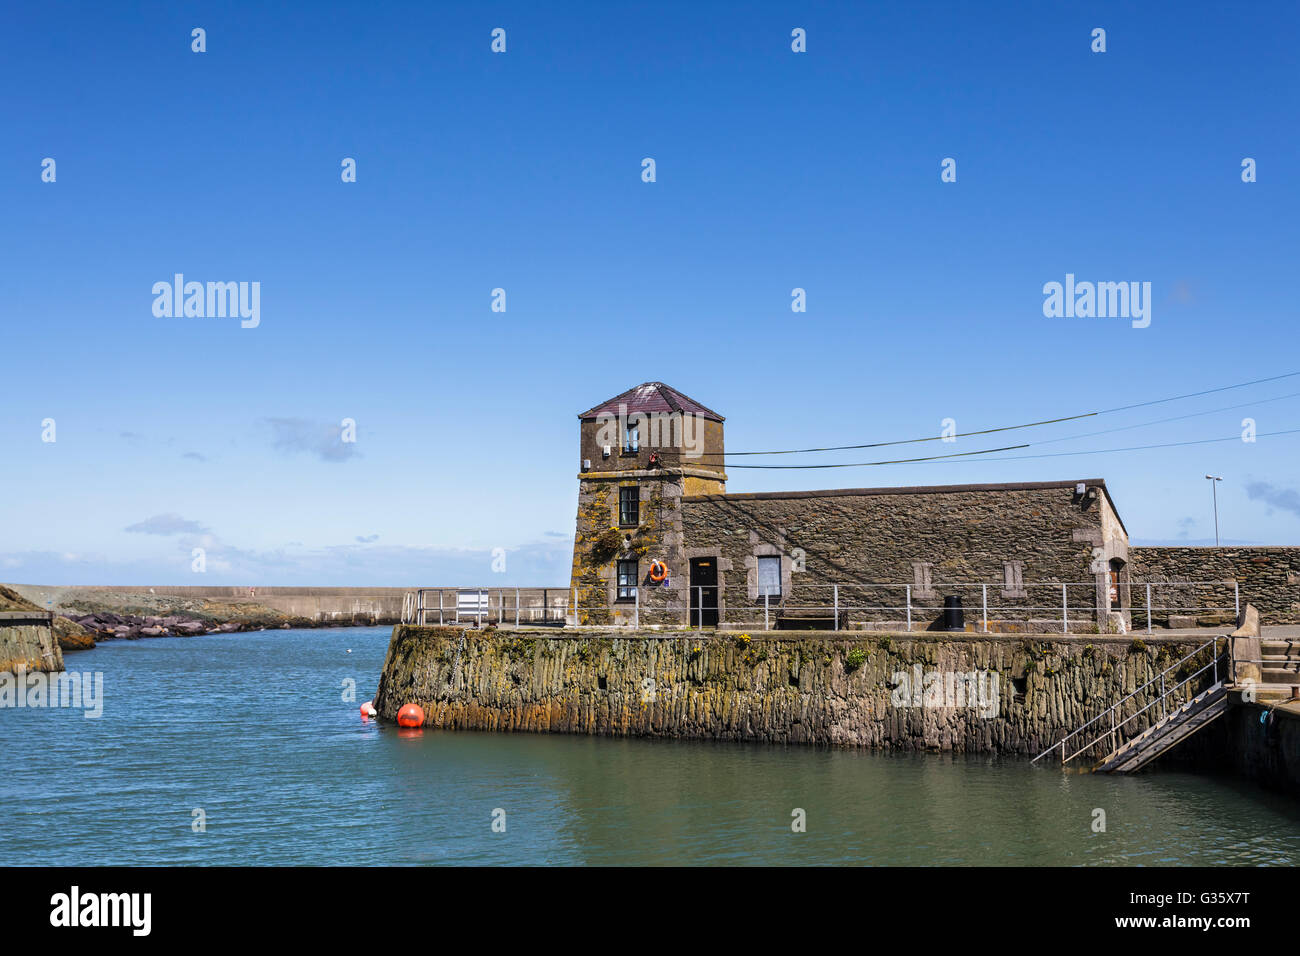 Der Wachturm Amlwch Port, Anglesey, Nord Wales Uk Stockfoto